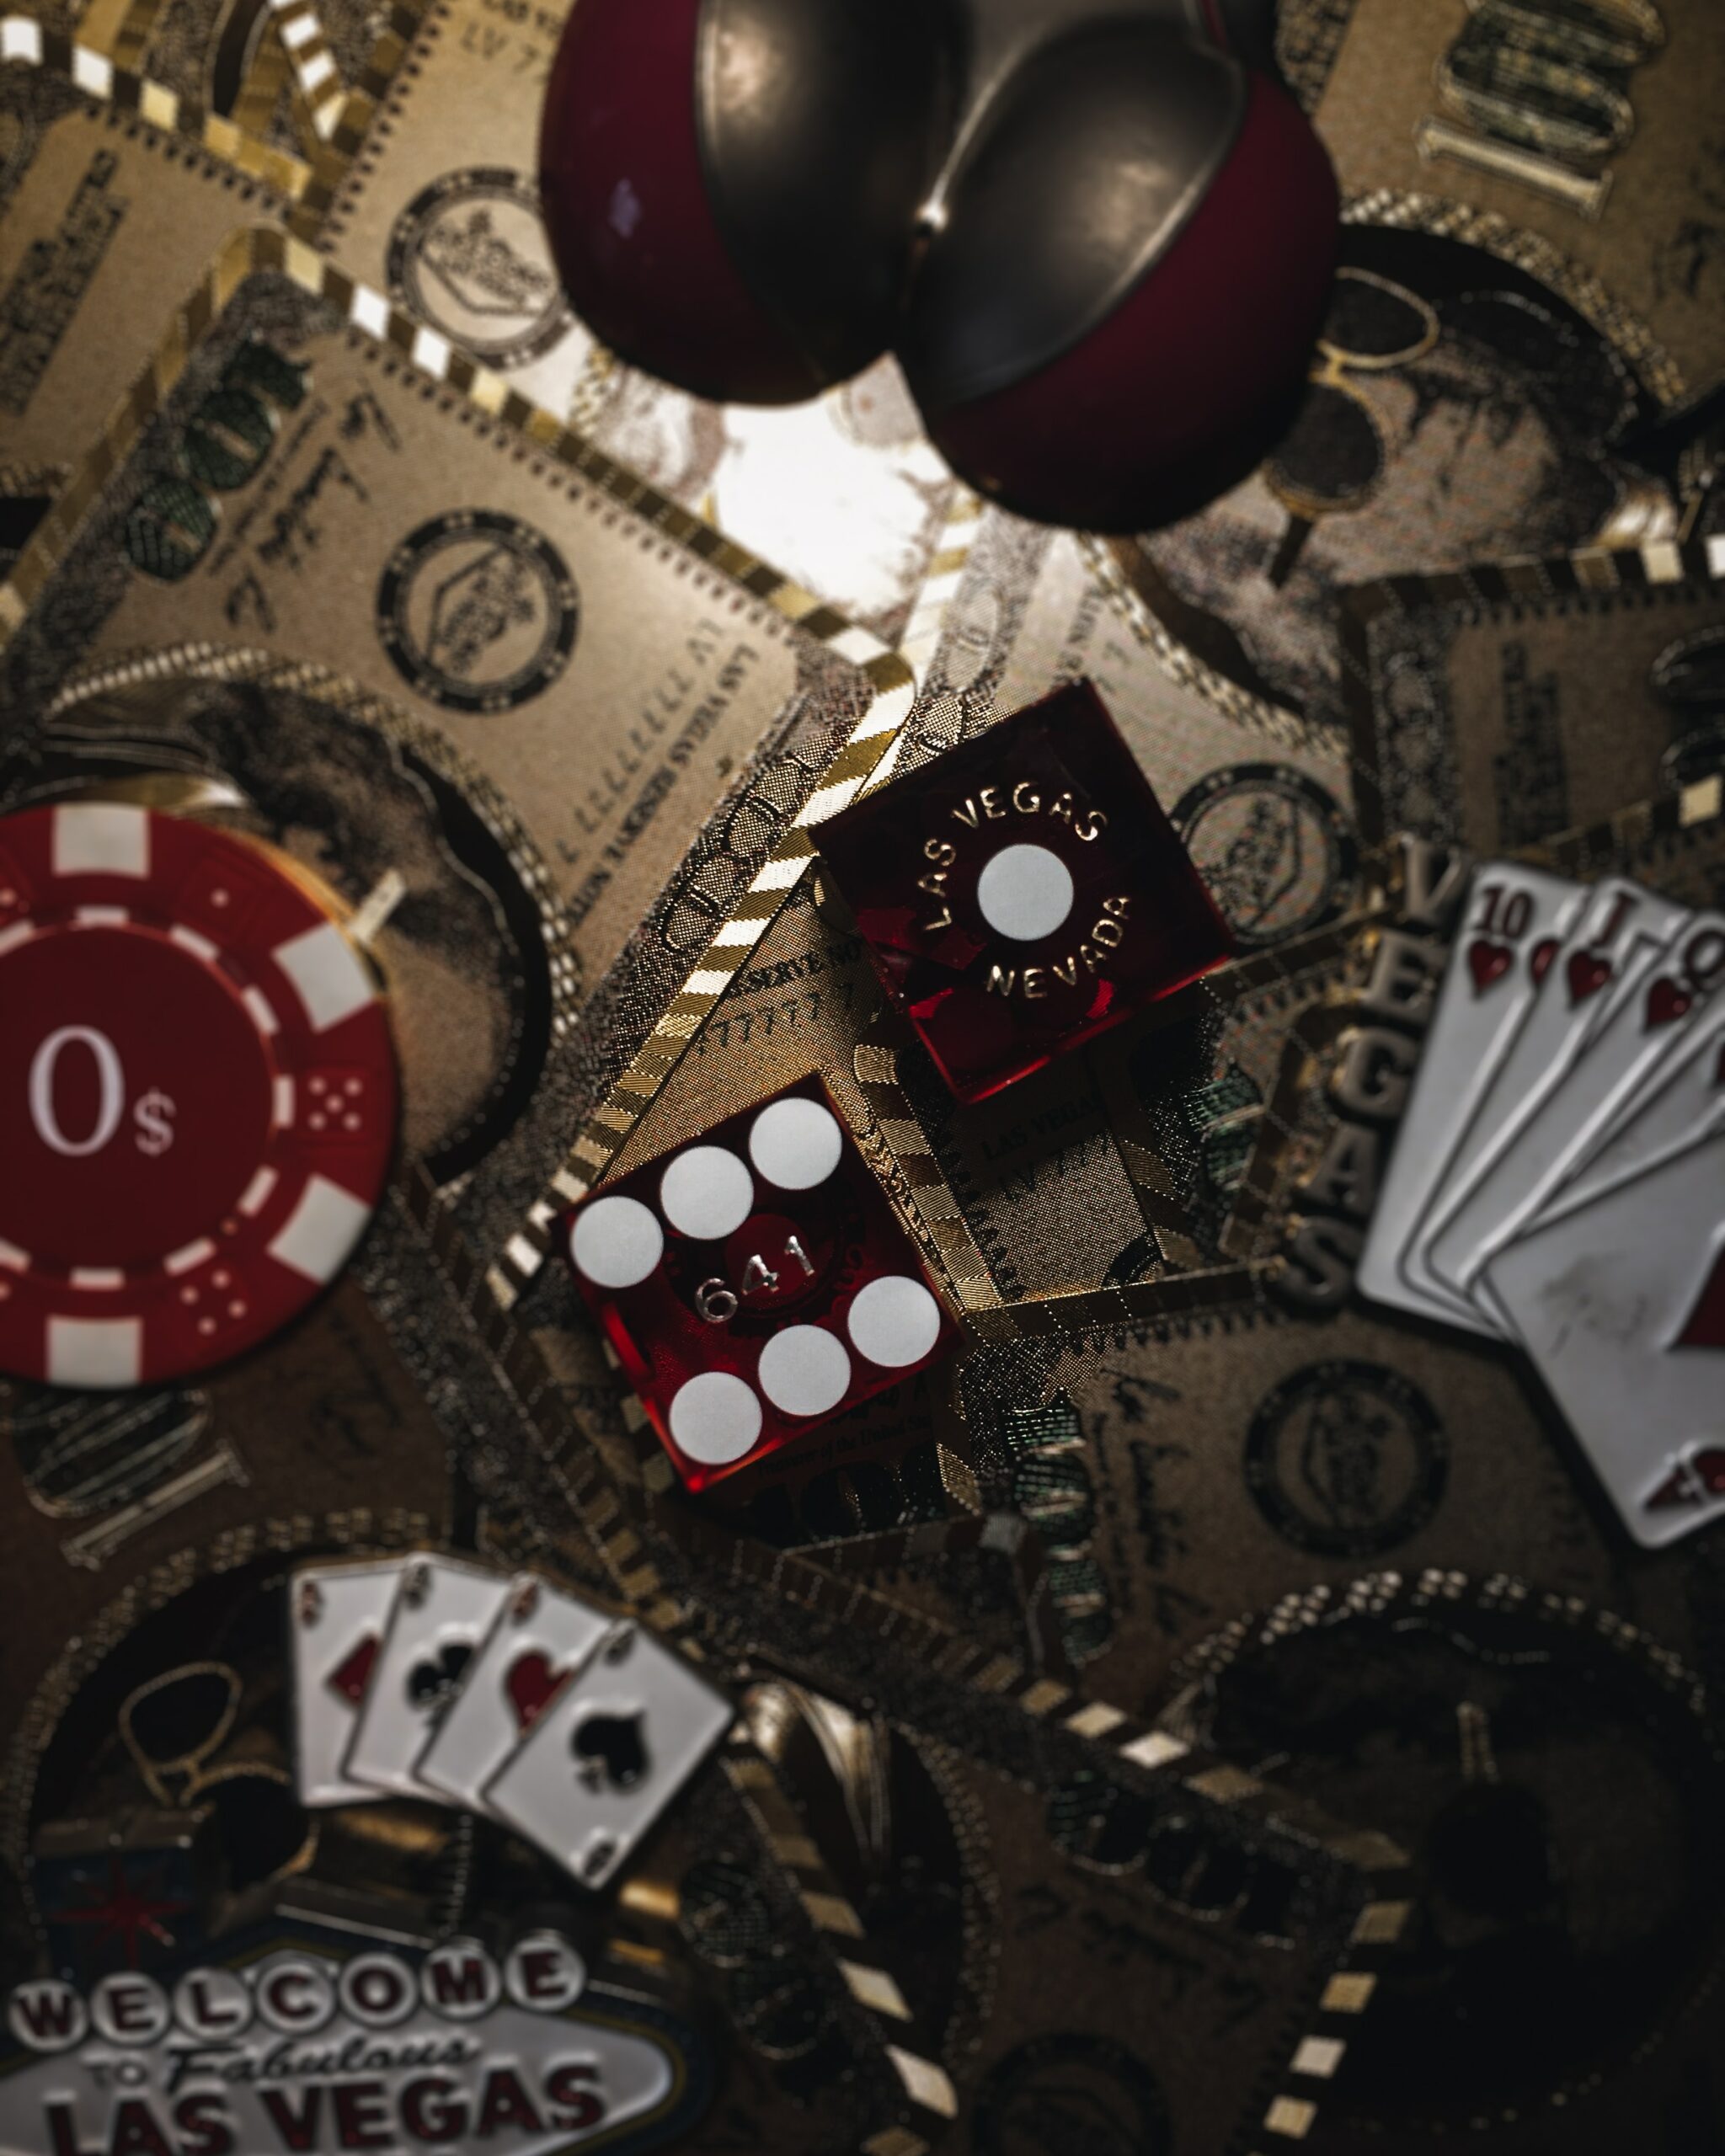 casino games online to play